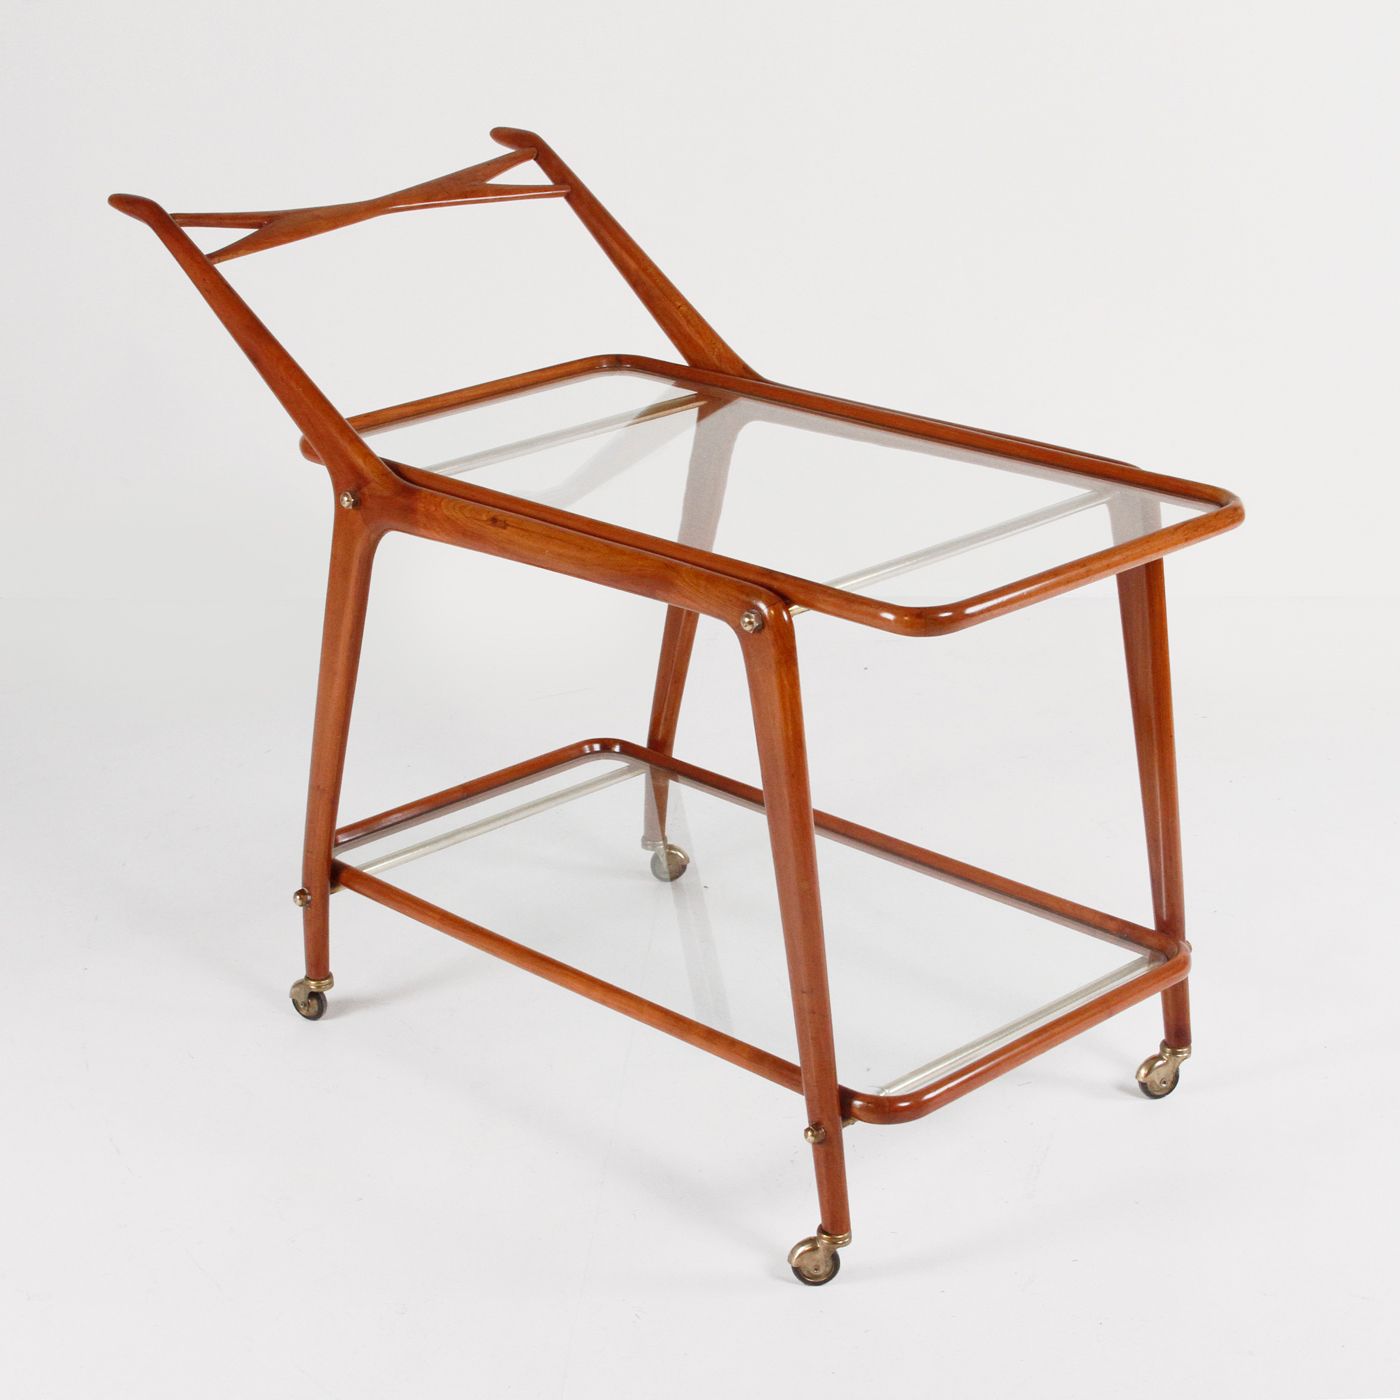 1950s wooden, glass and brass trolley image